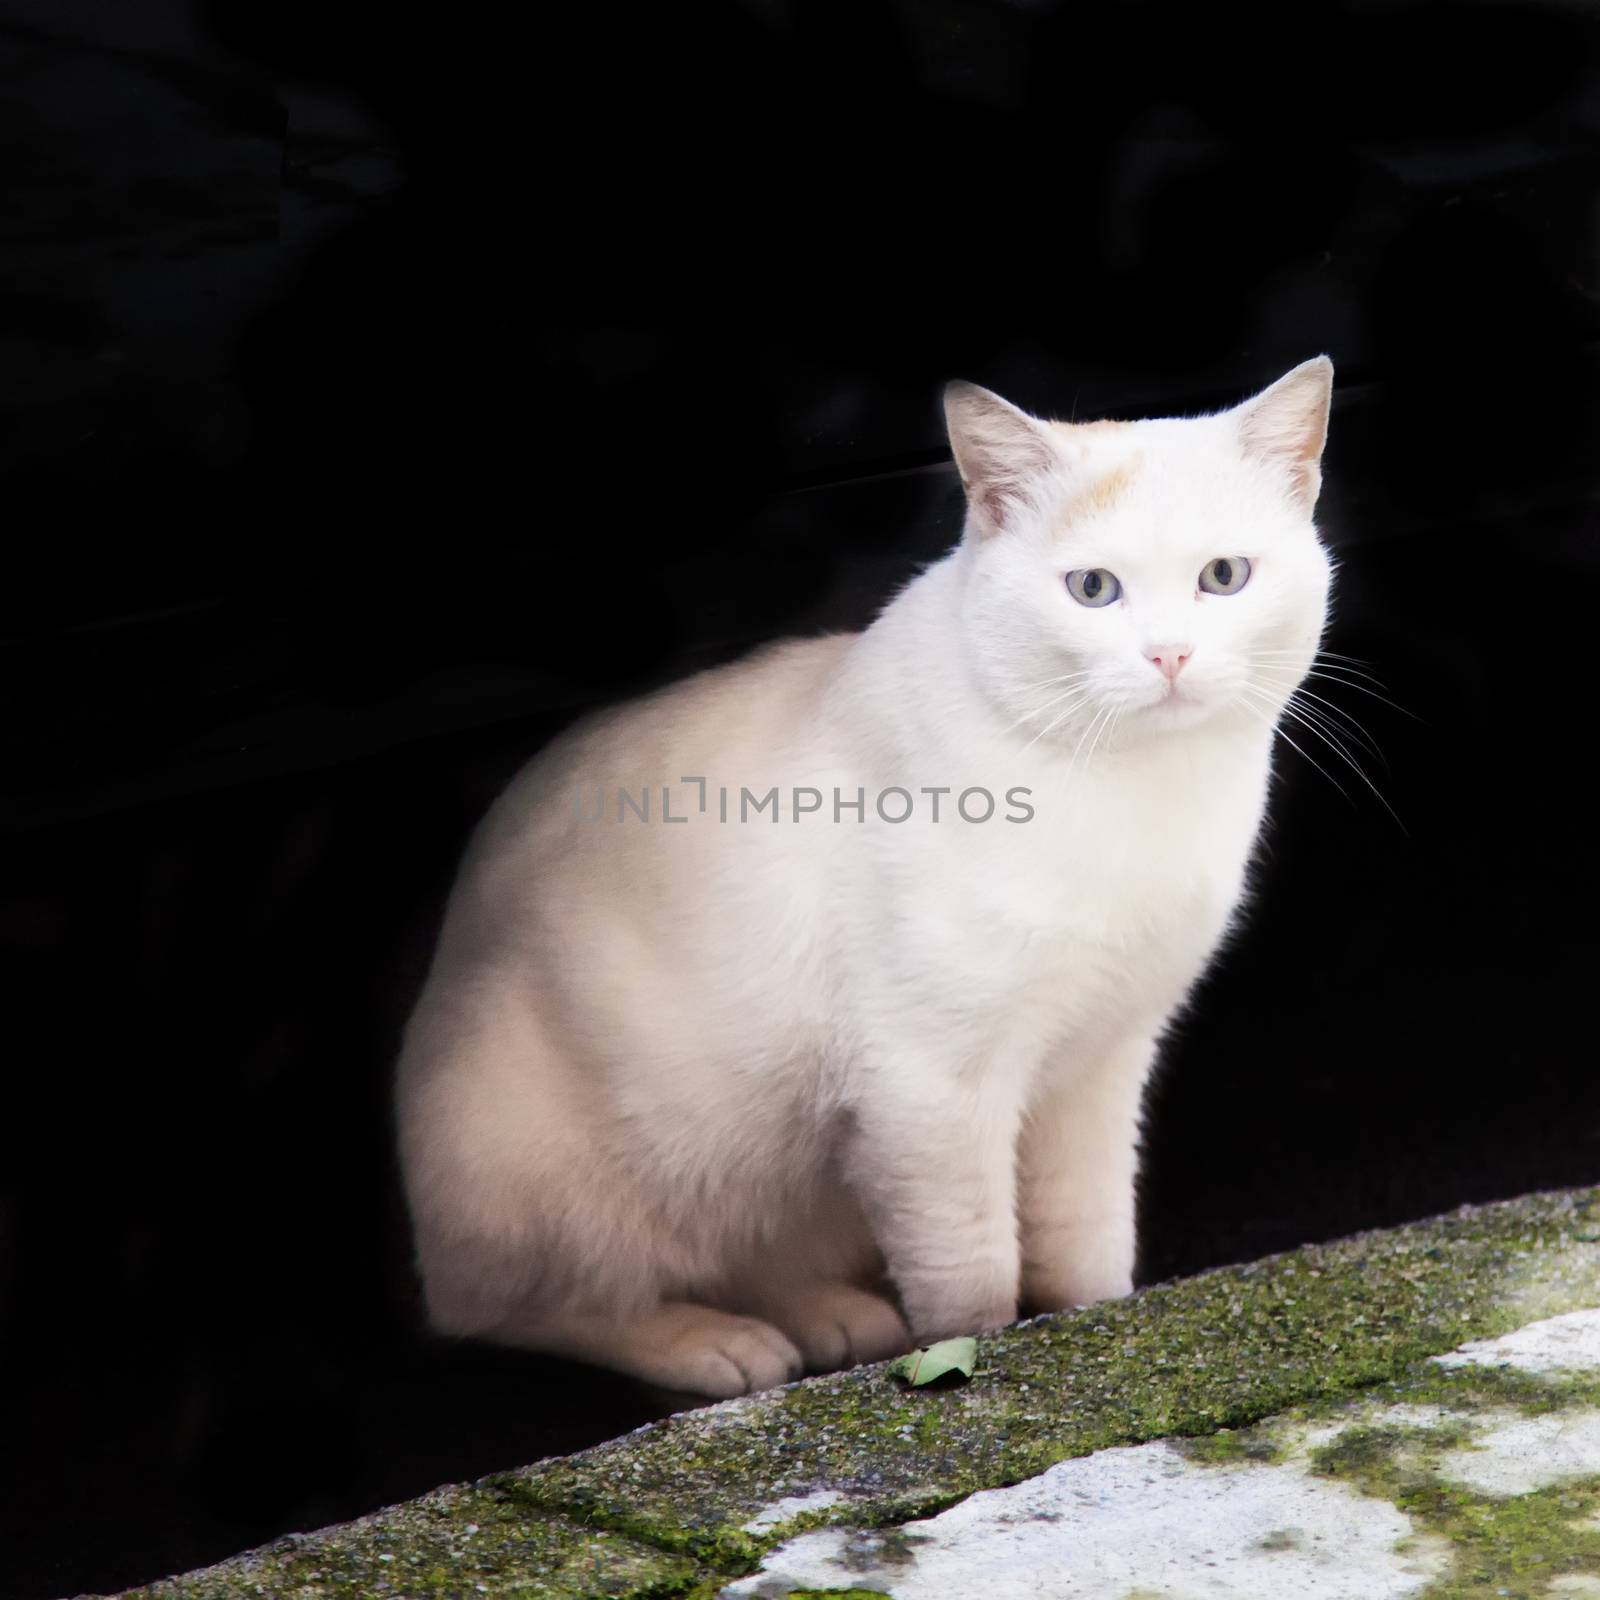 White cat coming out of the black, square image